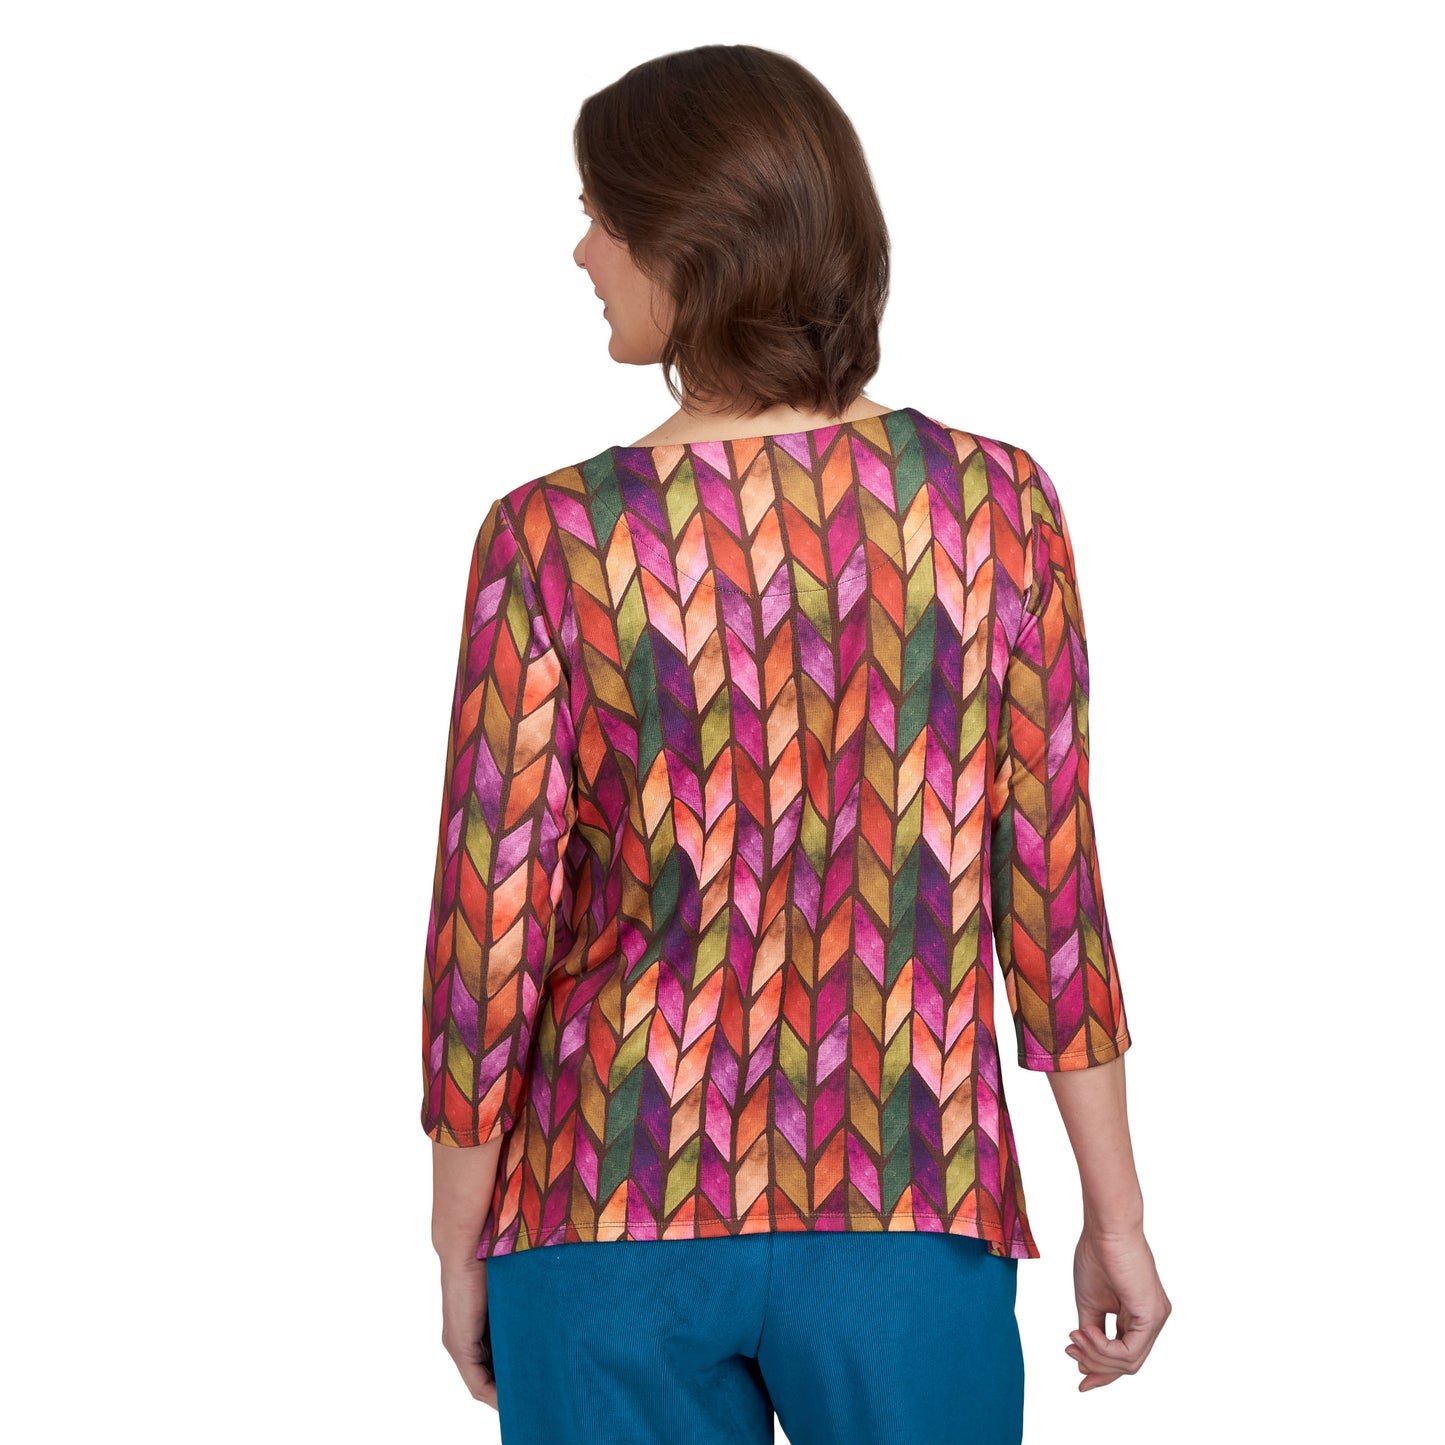 Alfred Dunner Chevron Knit Top